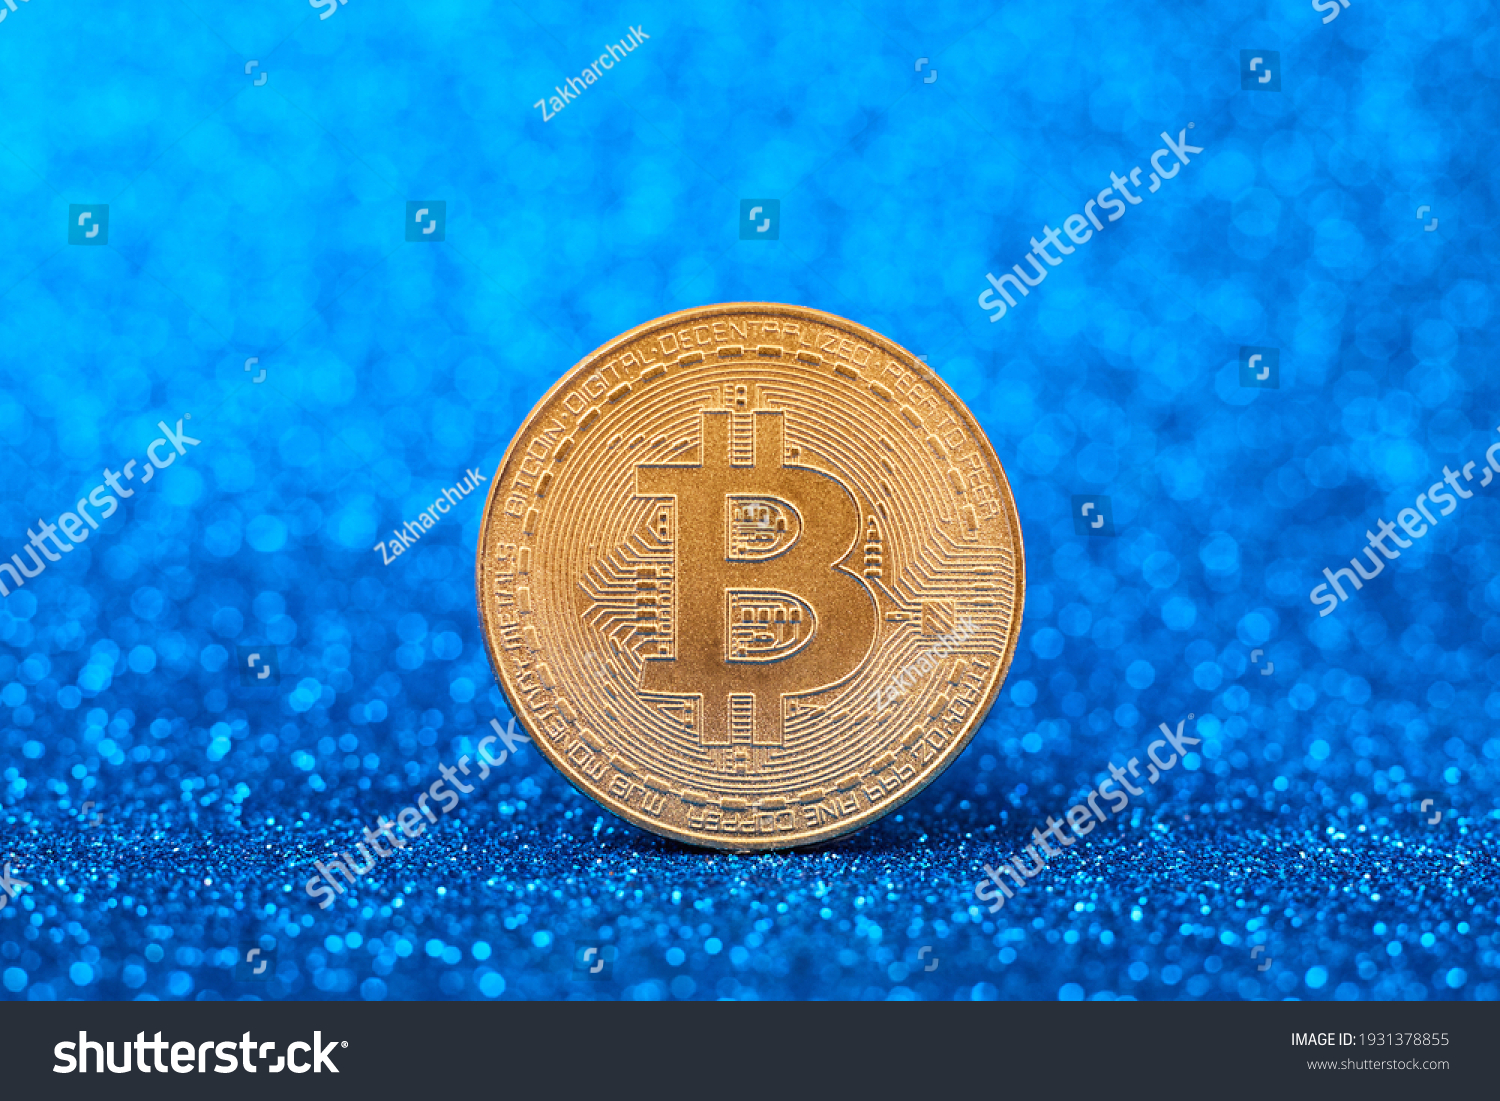 4-245-b-coin-images-stock-photos-and-amp-vectors-or-shutterstock